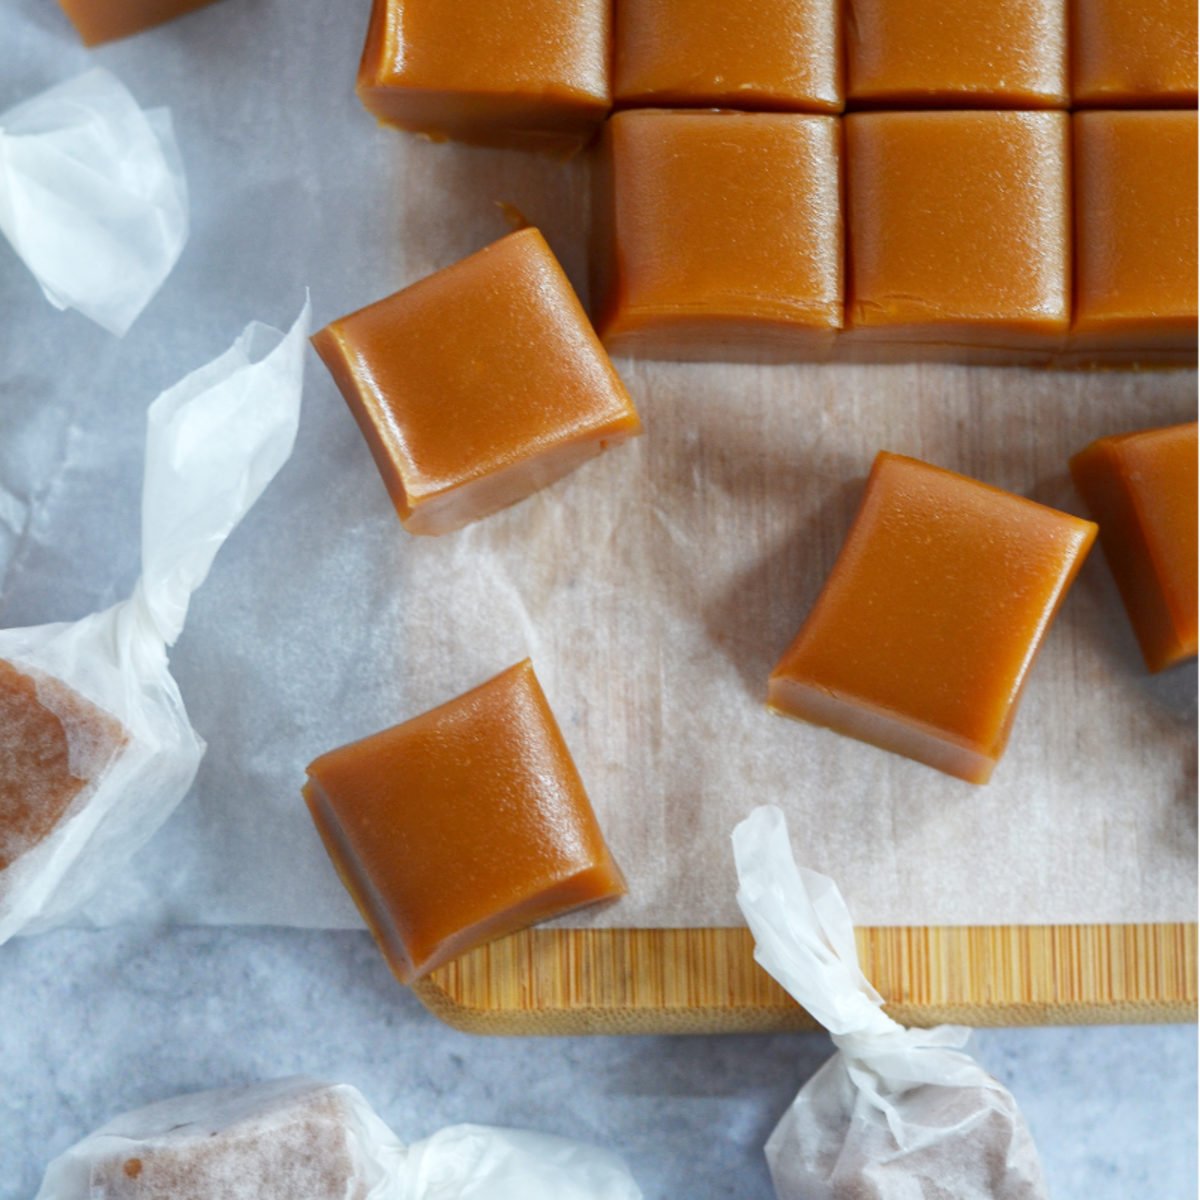 cut homemade caramels on a parchment lined cutting board